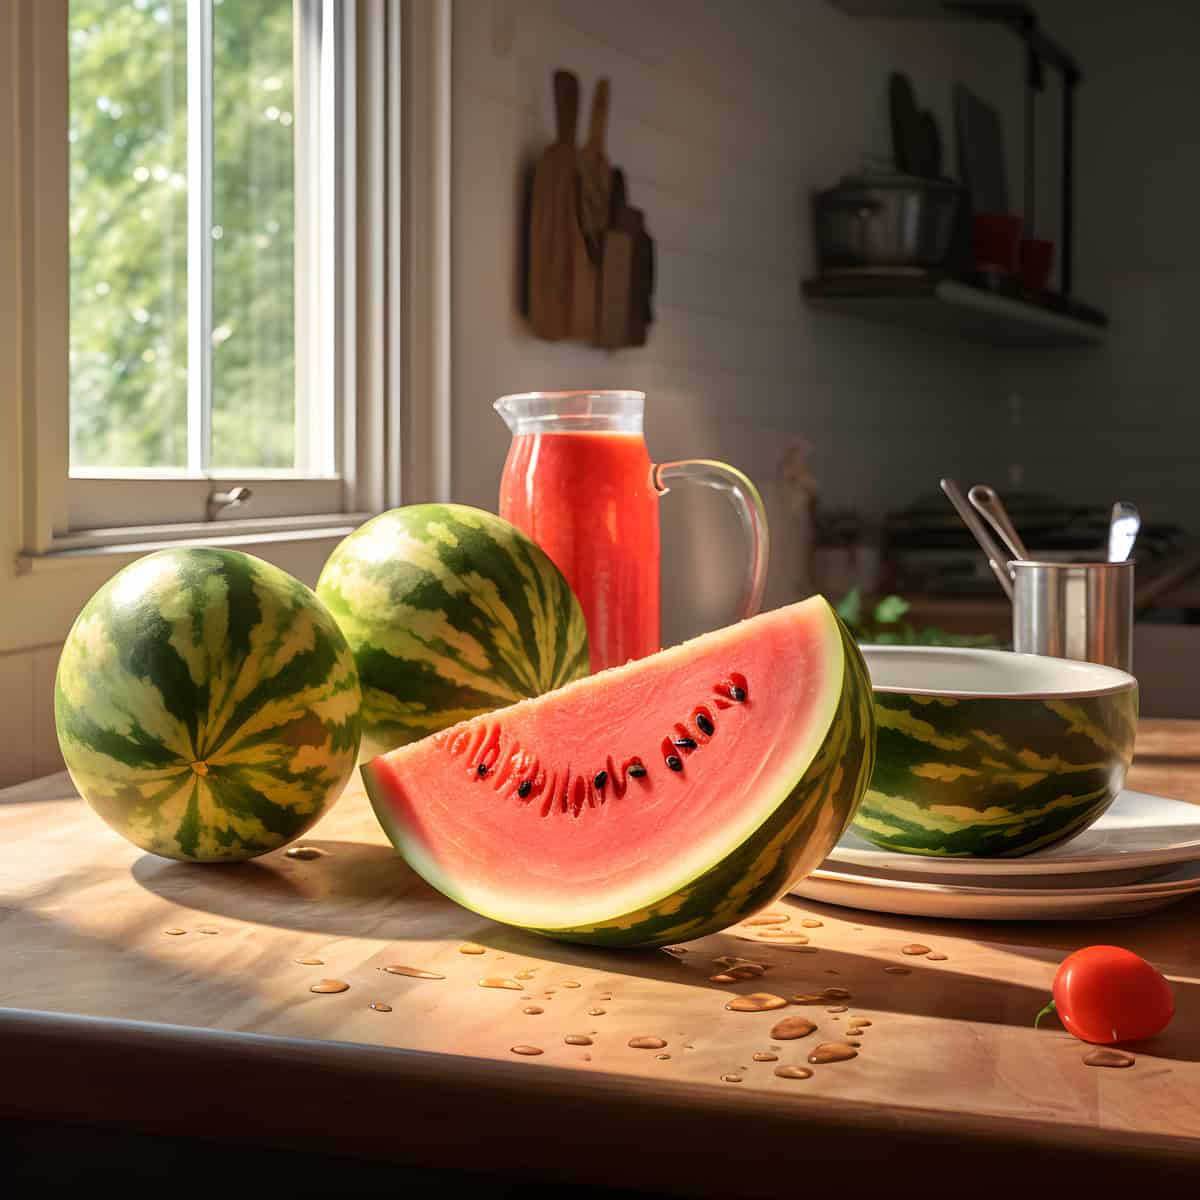 Watermelon on a kitchen counter